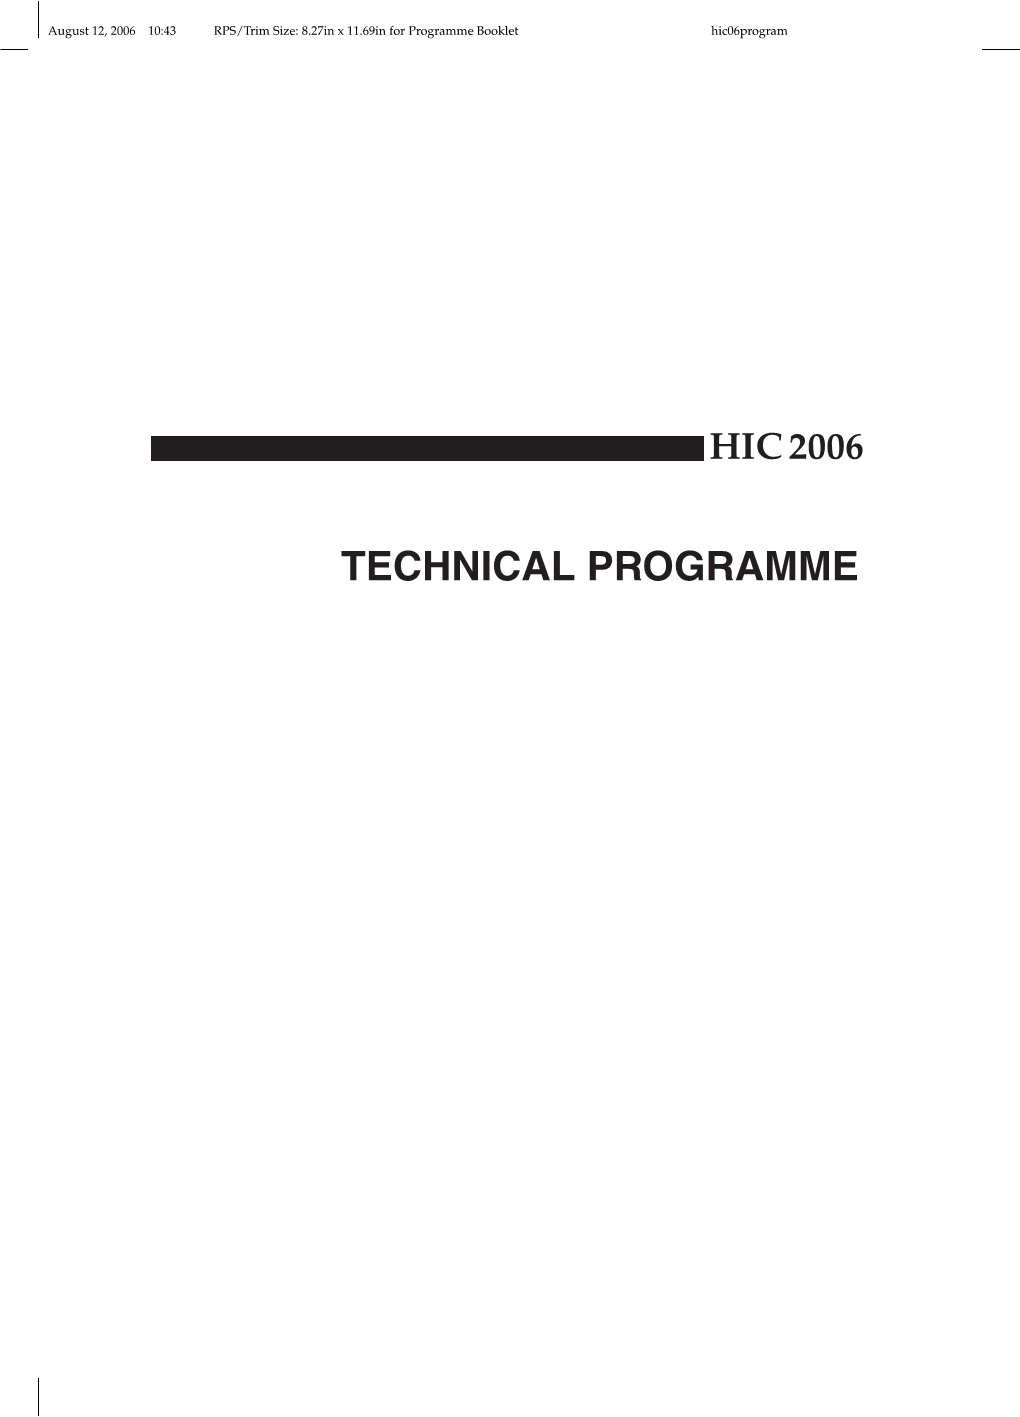 TECHNICAL PROGRAMME August 12, 2006 10:43 RPS/Trim Size: 8.27In X 11.69In for Programme Booklet Hic06program